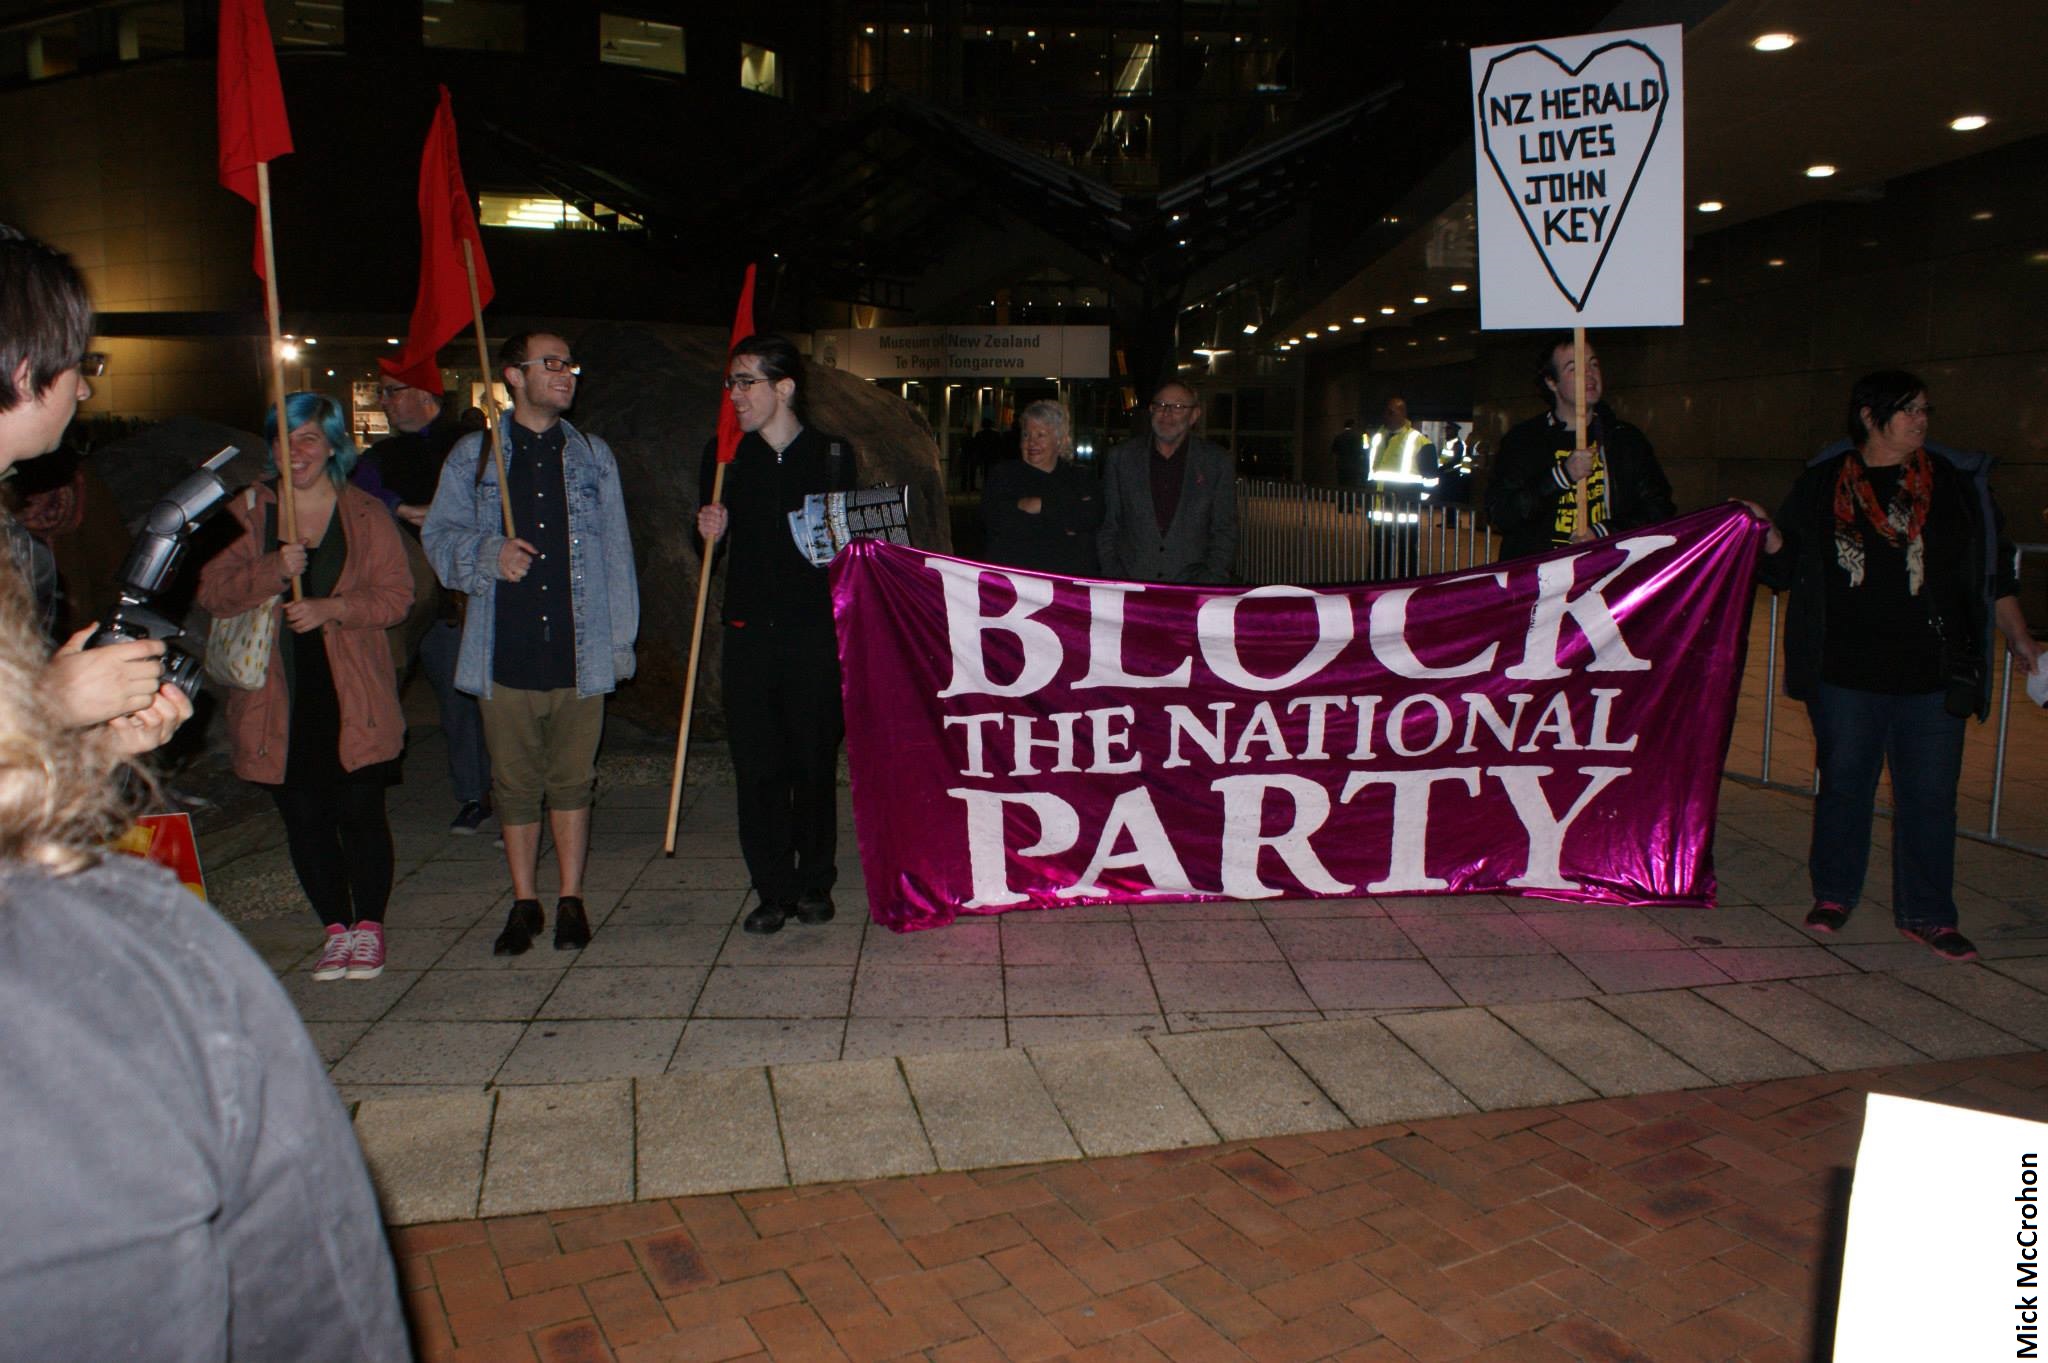 anti-National protest - Poneke Action Against Poverty - 28 June 2014 - Te Papa - Wellington (101)